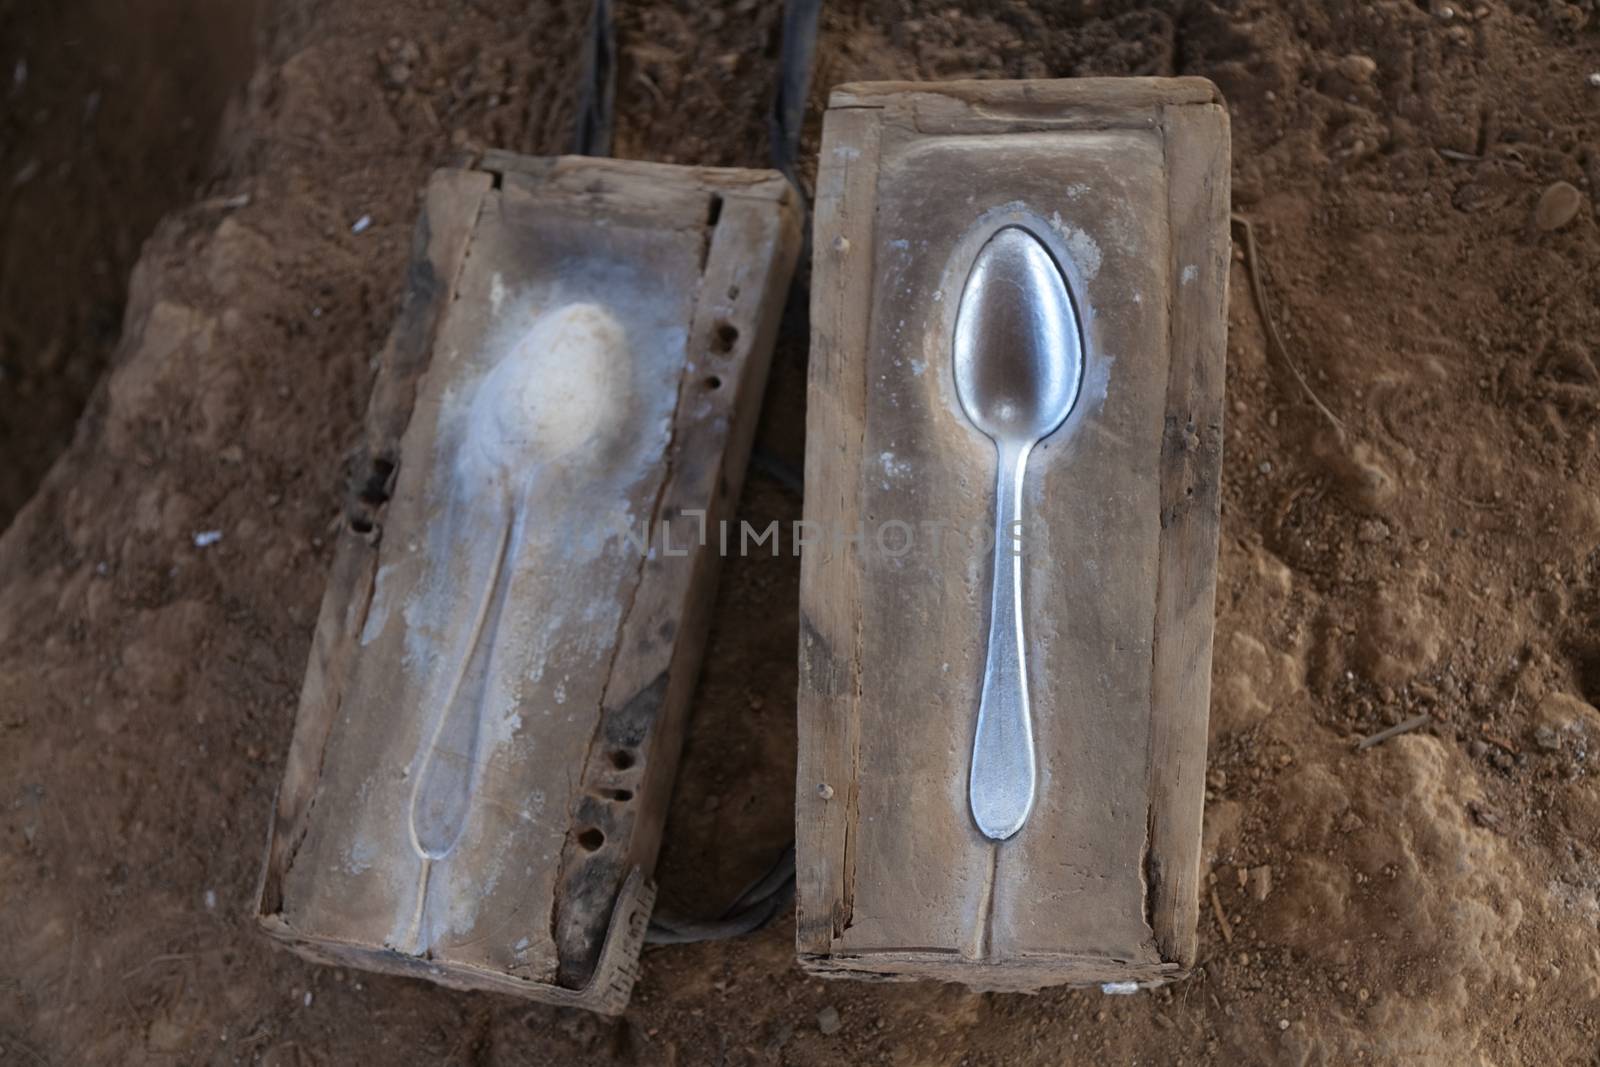 Ban Napia near Phonsavan Laos a village where people makes spoons from bombs leftover from Vietnam war. Examples of moulds used to make spoons from molten aluminium.High quality photo